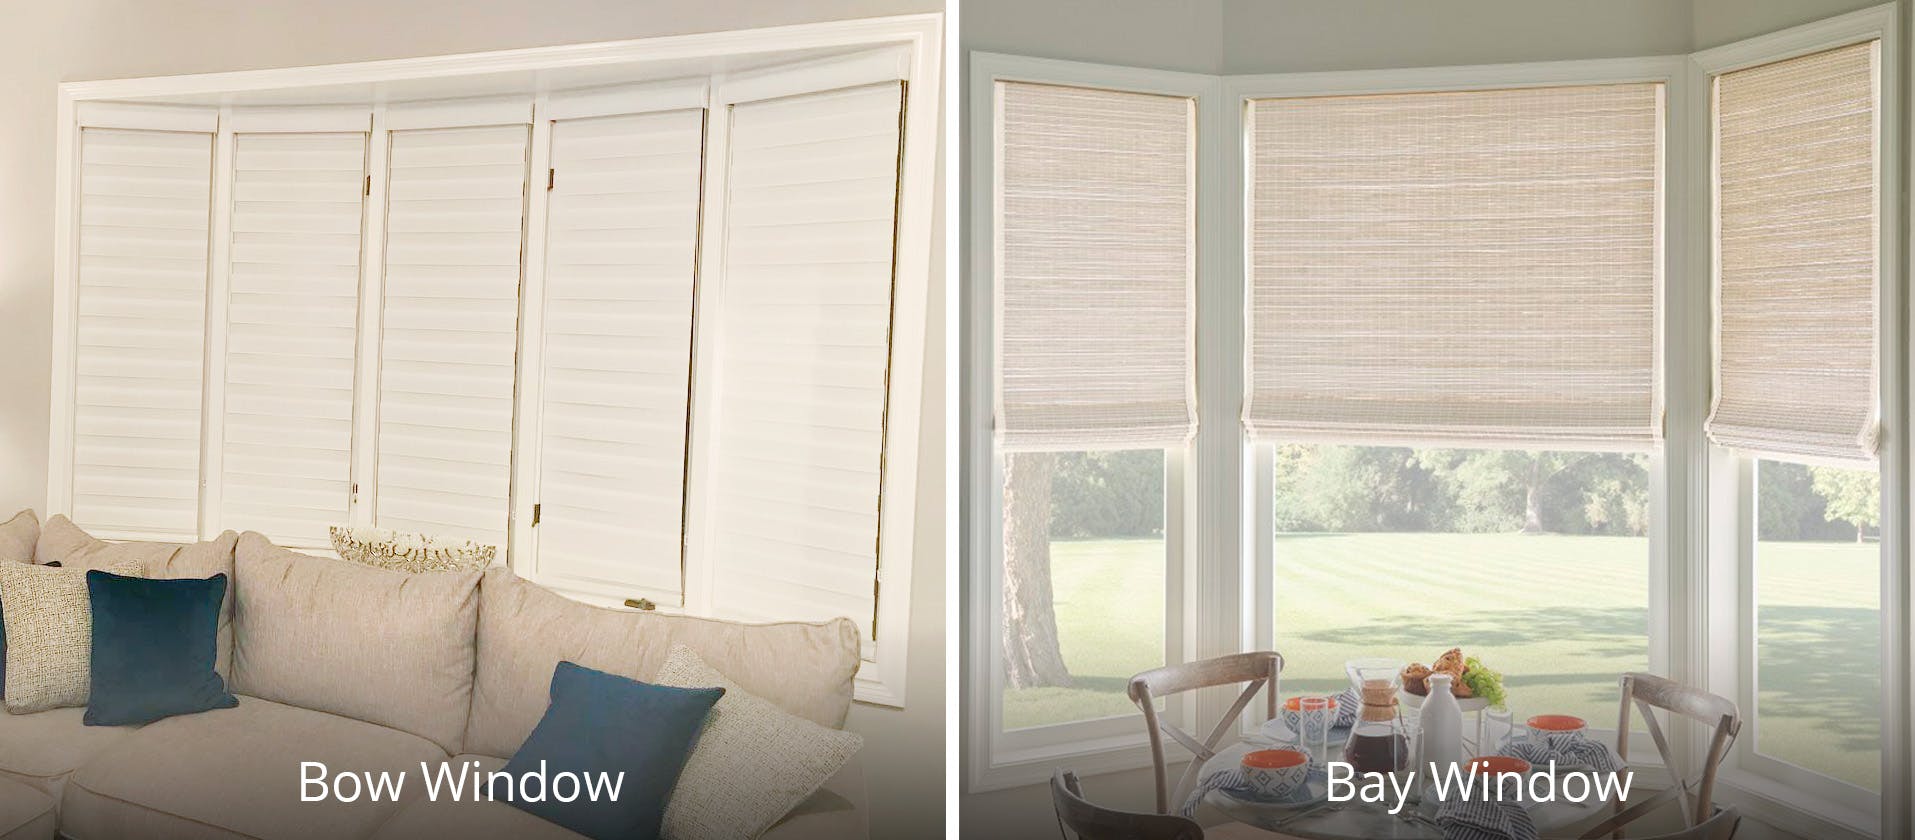 How to Measure Bay Windows for Blinds or Shades